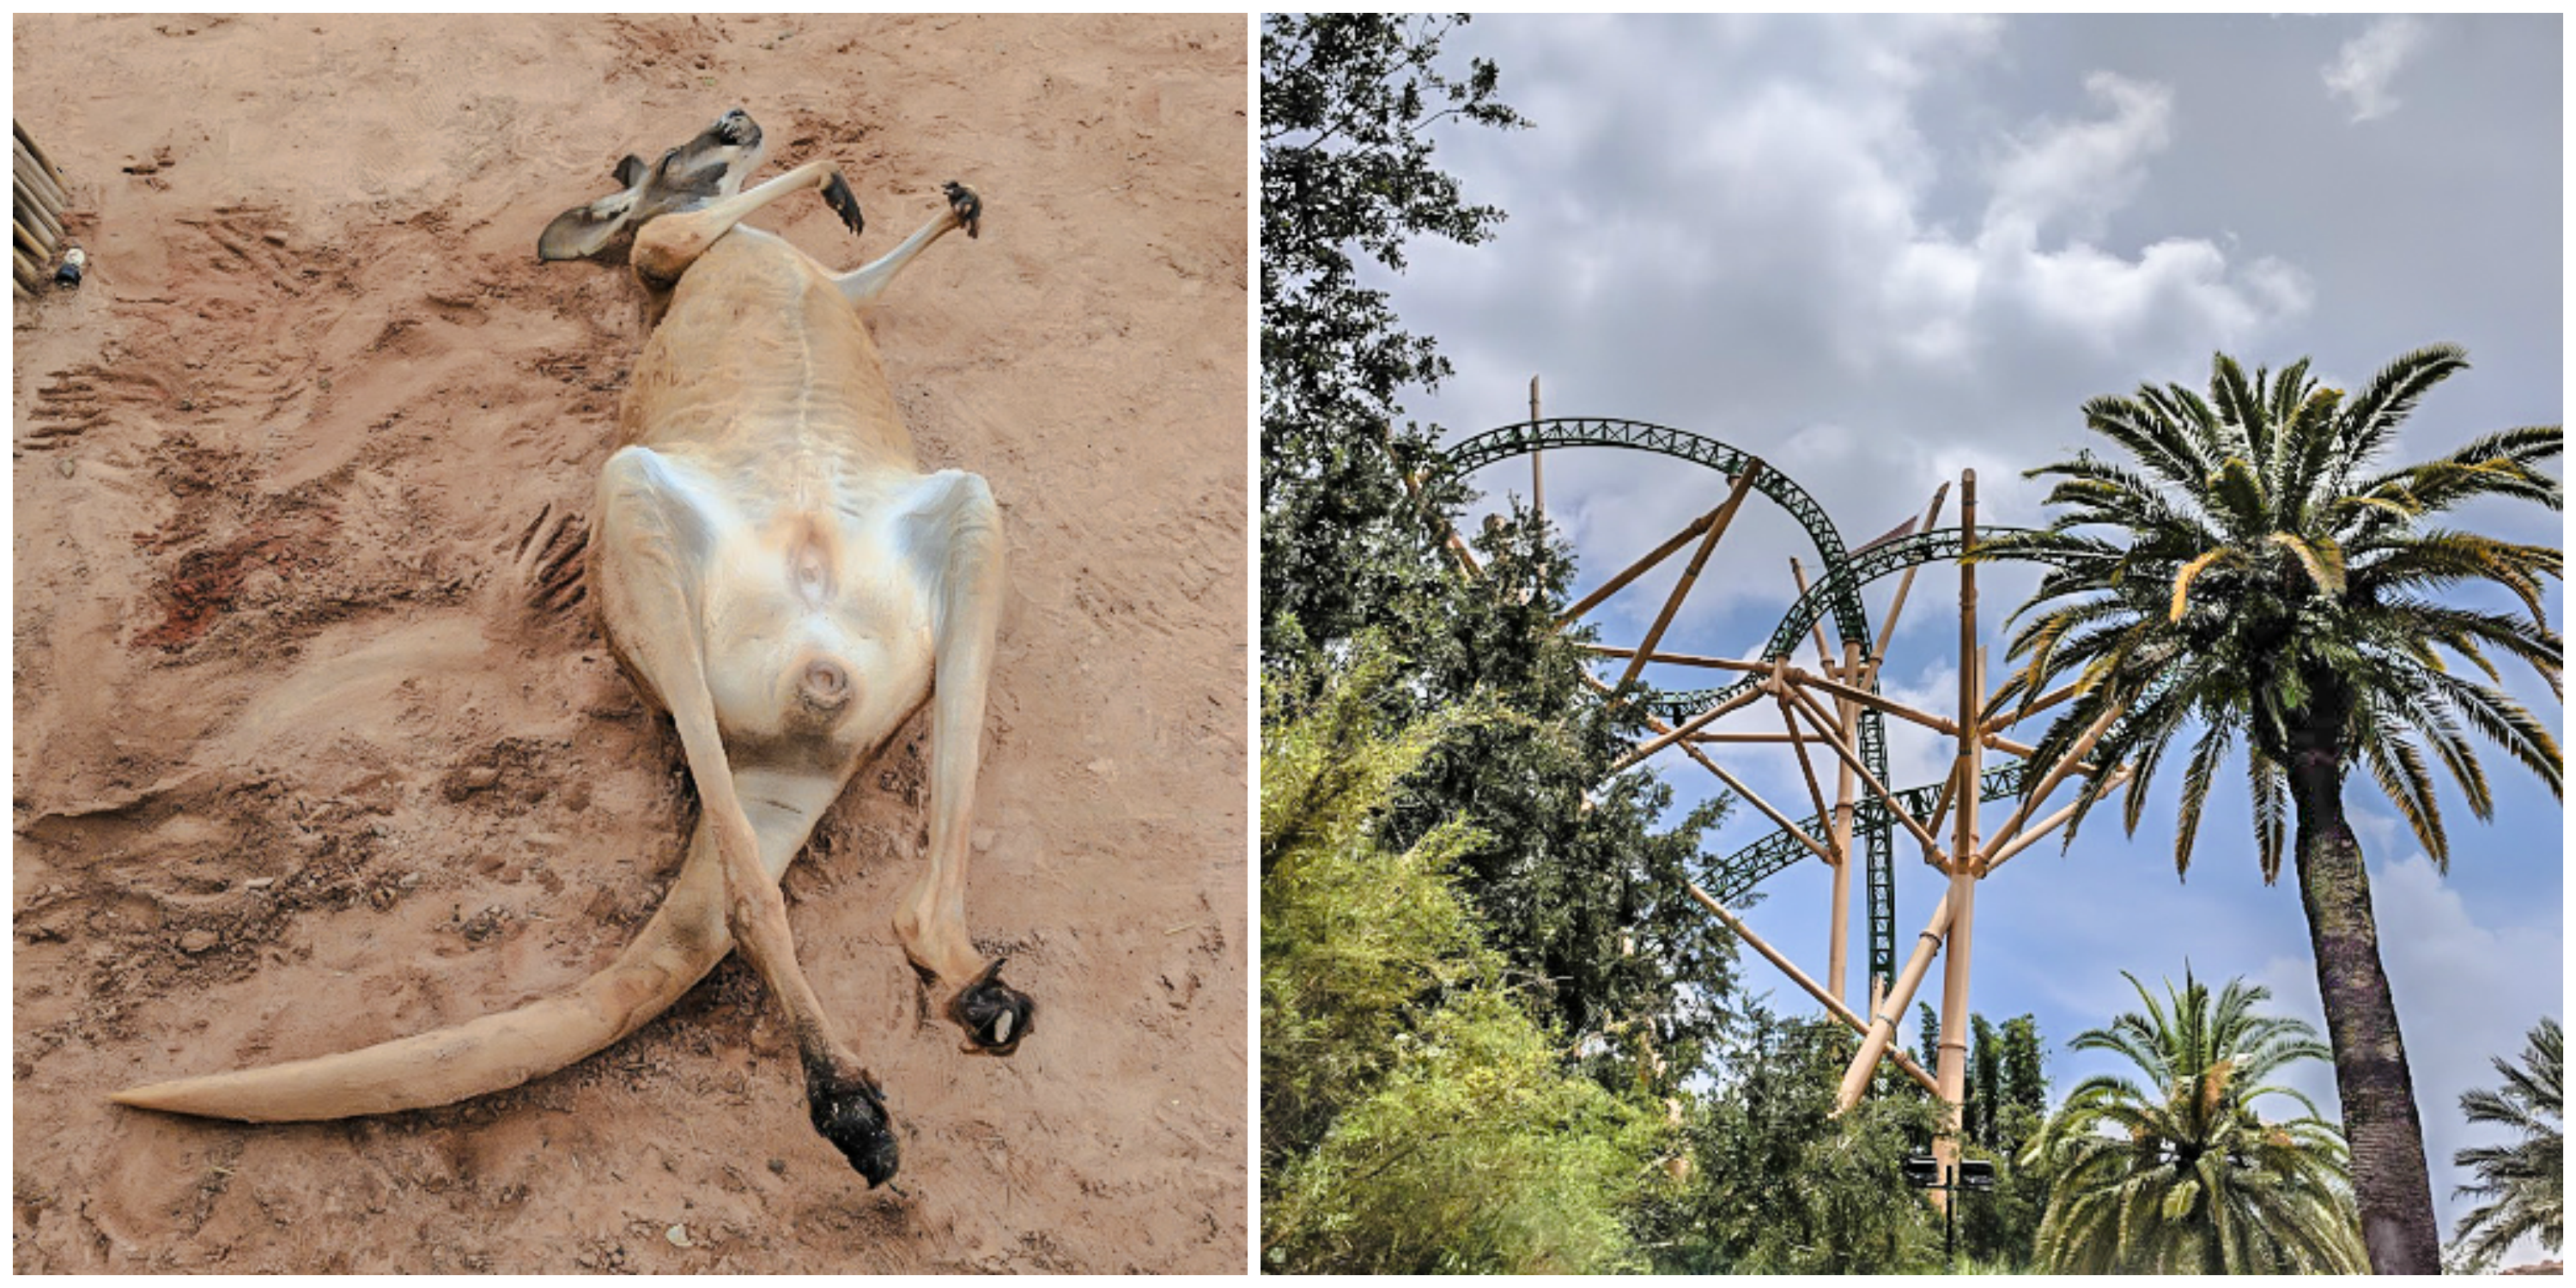 Kangaroos and roller coasters at Busch Gardens // How to use the Tampa Bay CityPASS as a childless adult. #buschgardens #tampabay #florida #citypass #traveltips #vacation #tampa #timebudgettravel